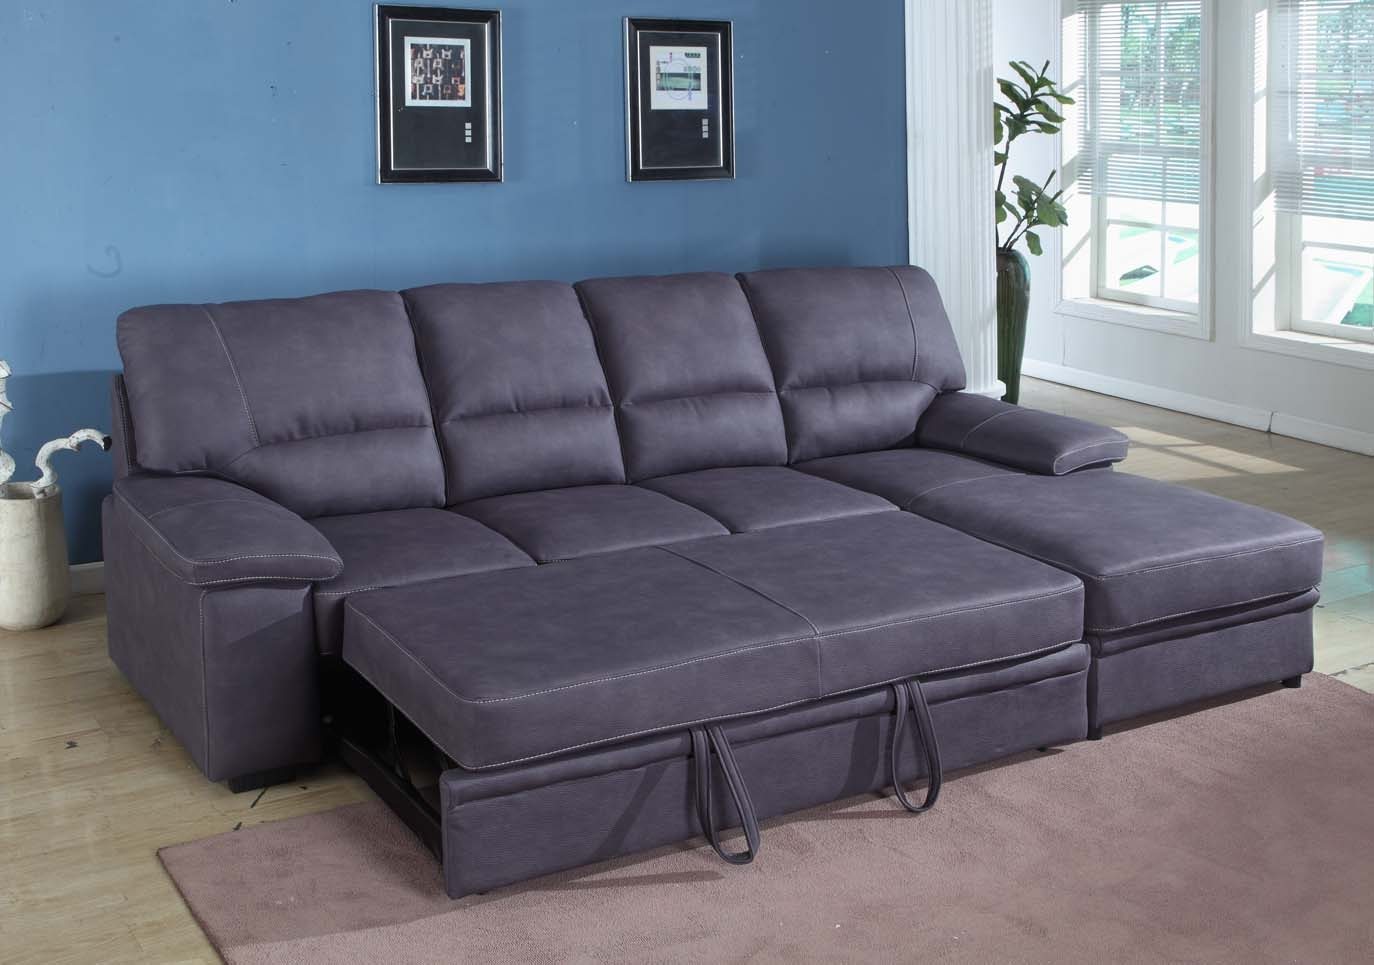 leather sectional sleeper sofa with chaise brilliant sectional sleeper sofa with chaise cool living room design JQVJKEE